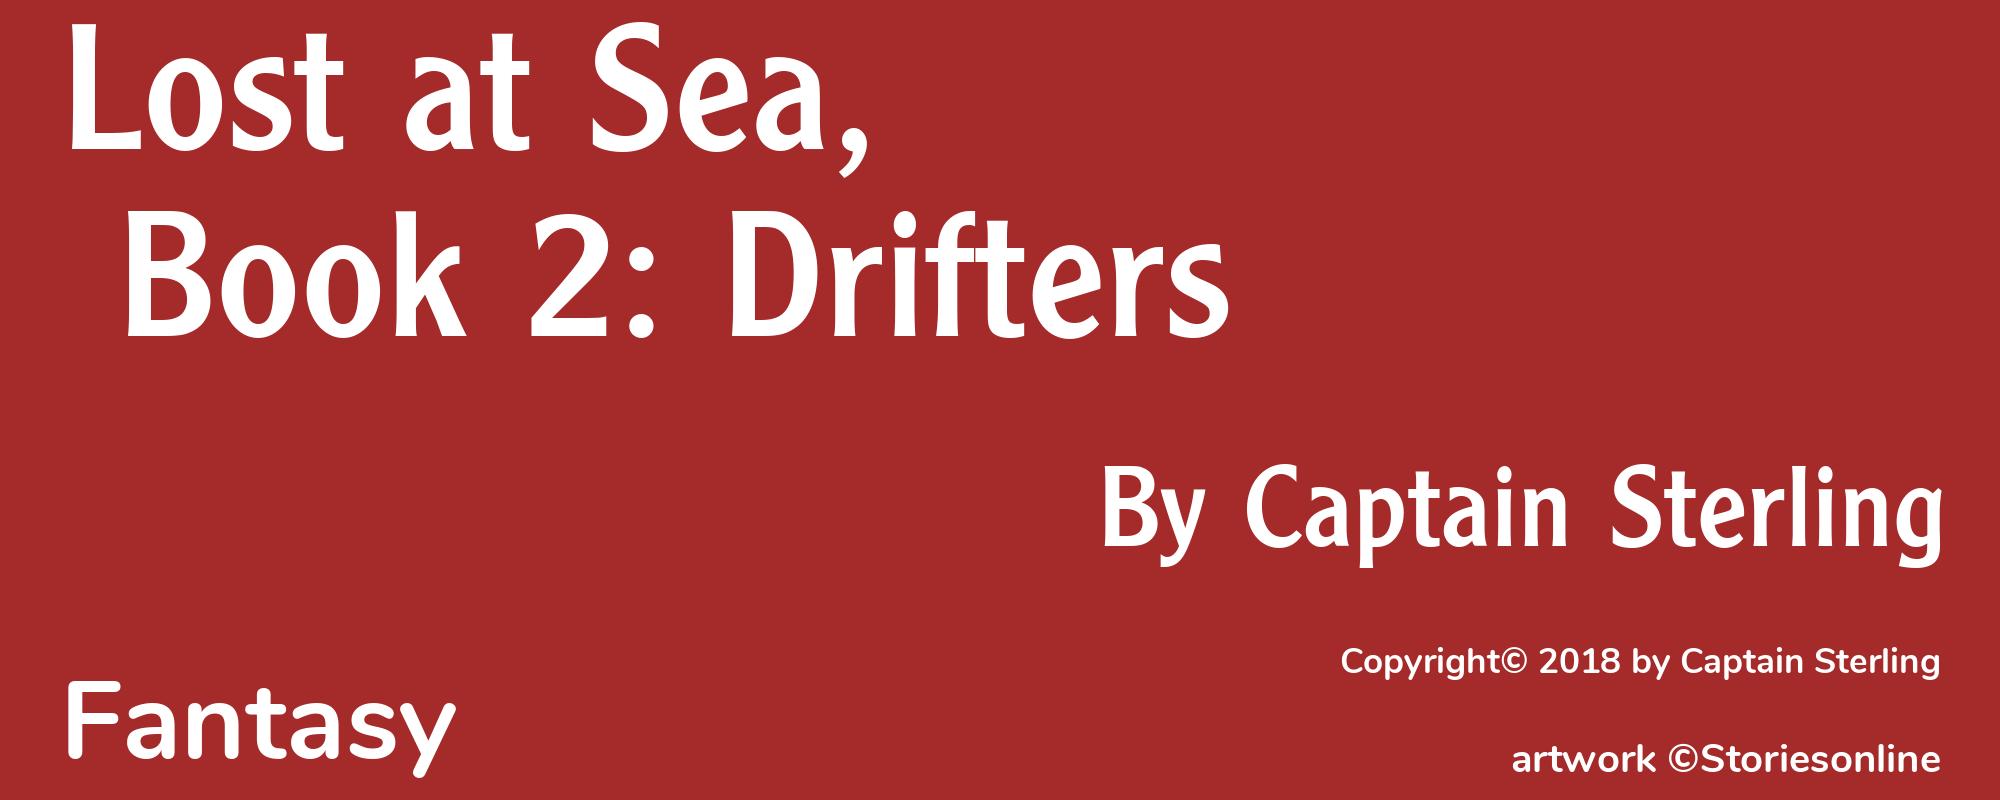 Lost at Sea, Book 2: Drifters - Cover